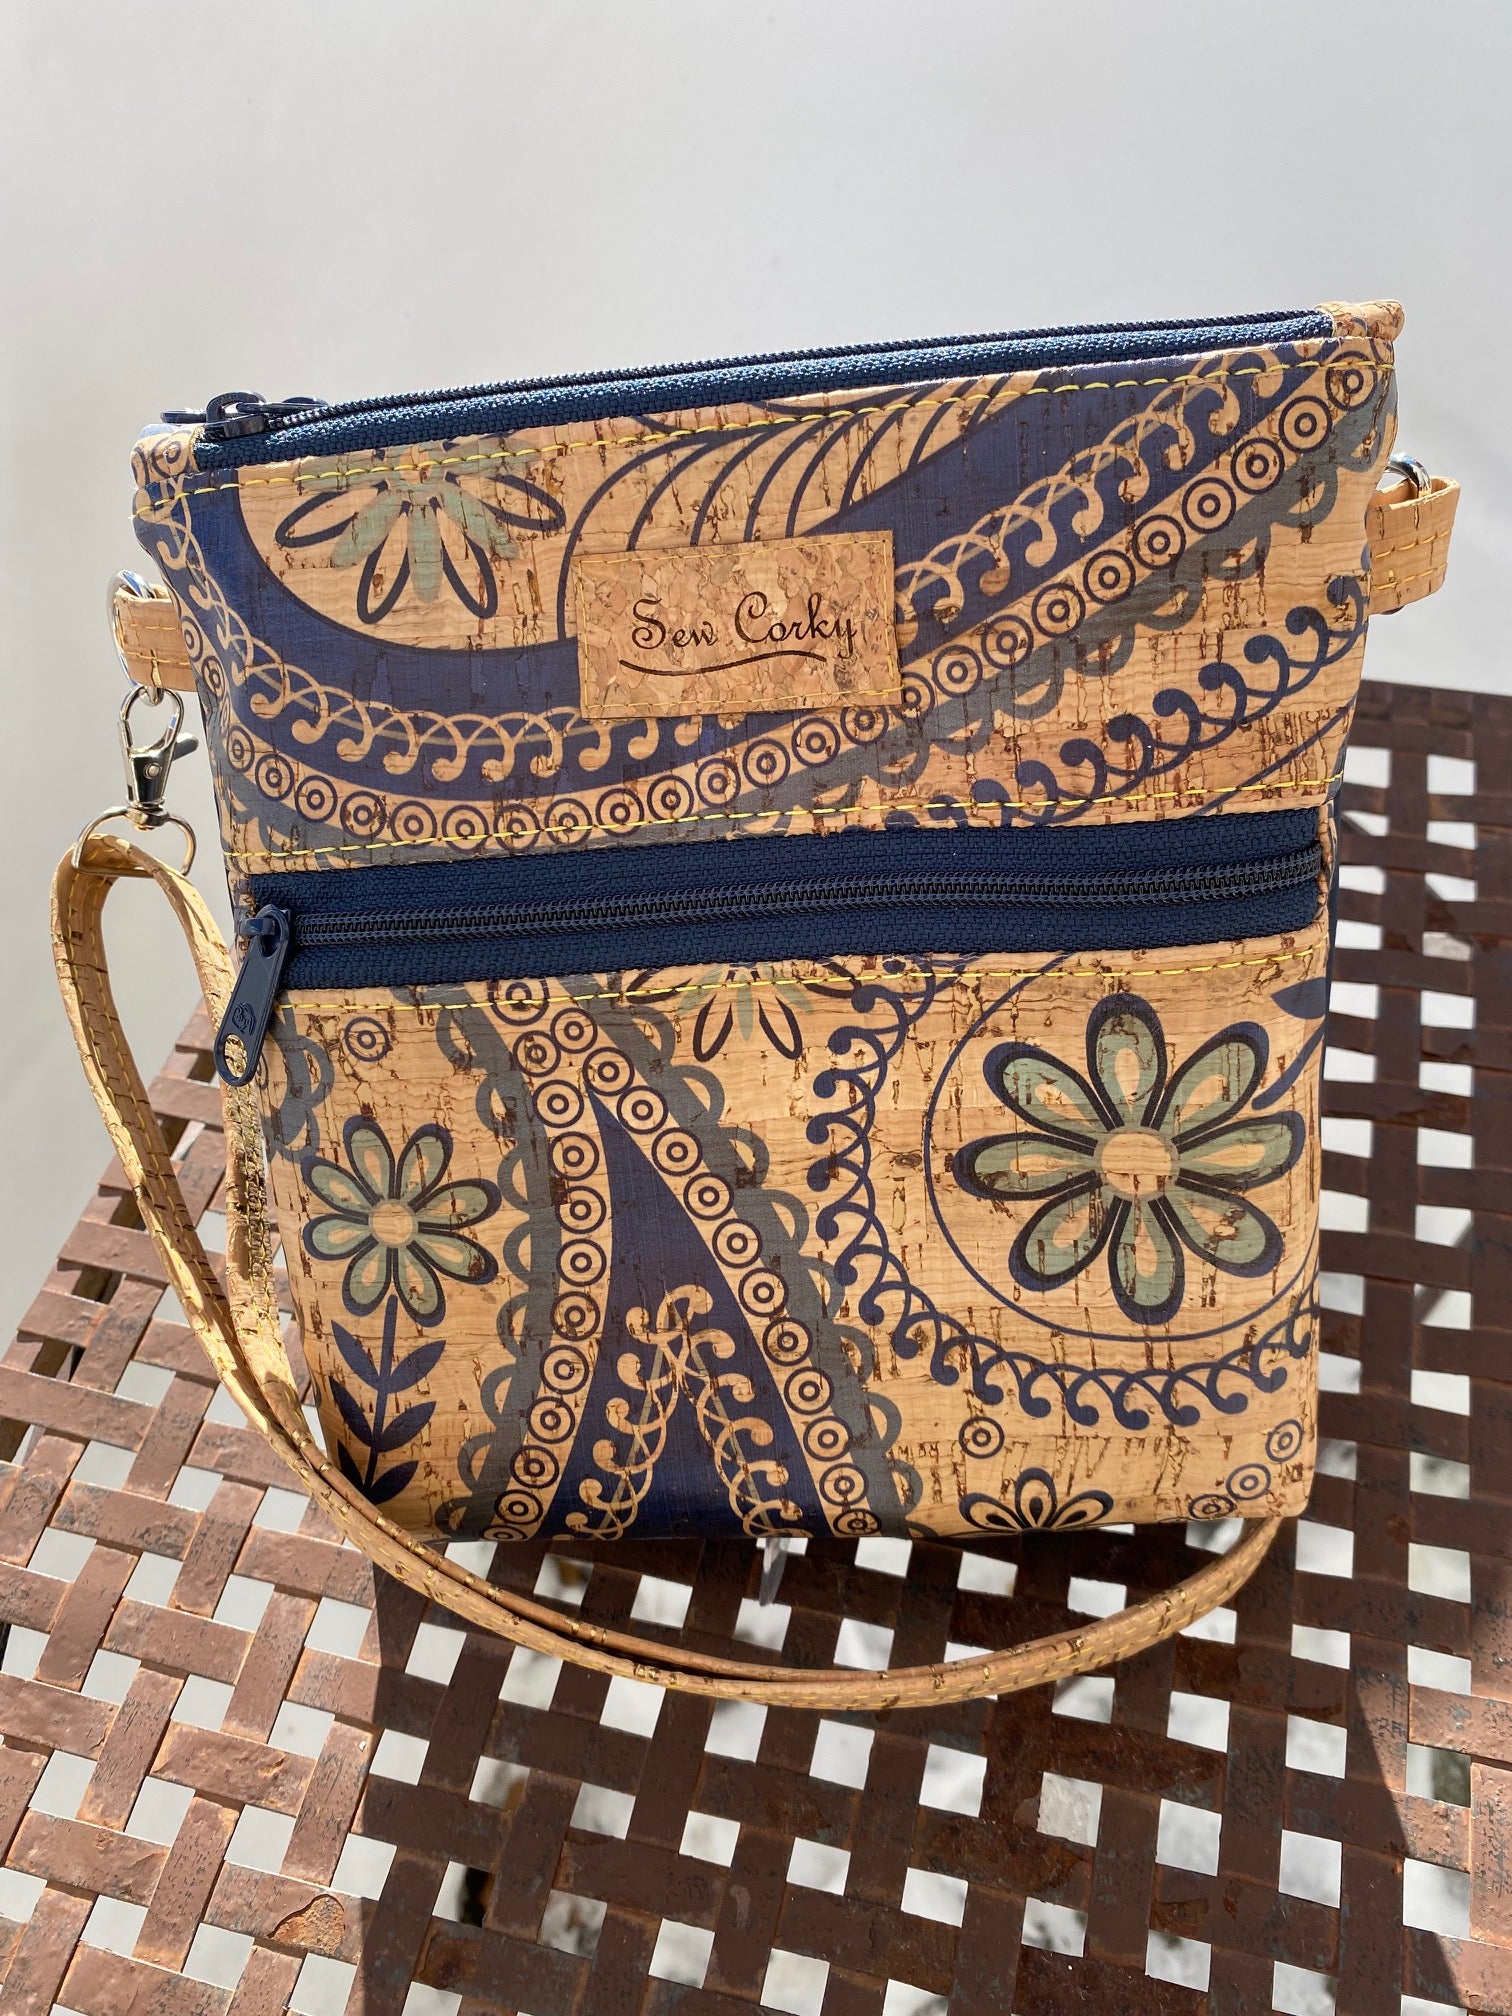 K6-THE BROOKIE CROSSBODY IN NAVY BLUE AND PAISLEY